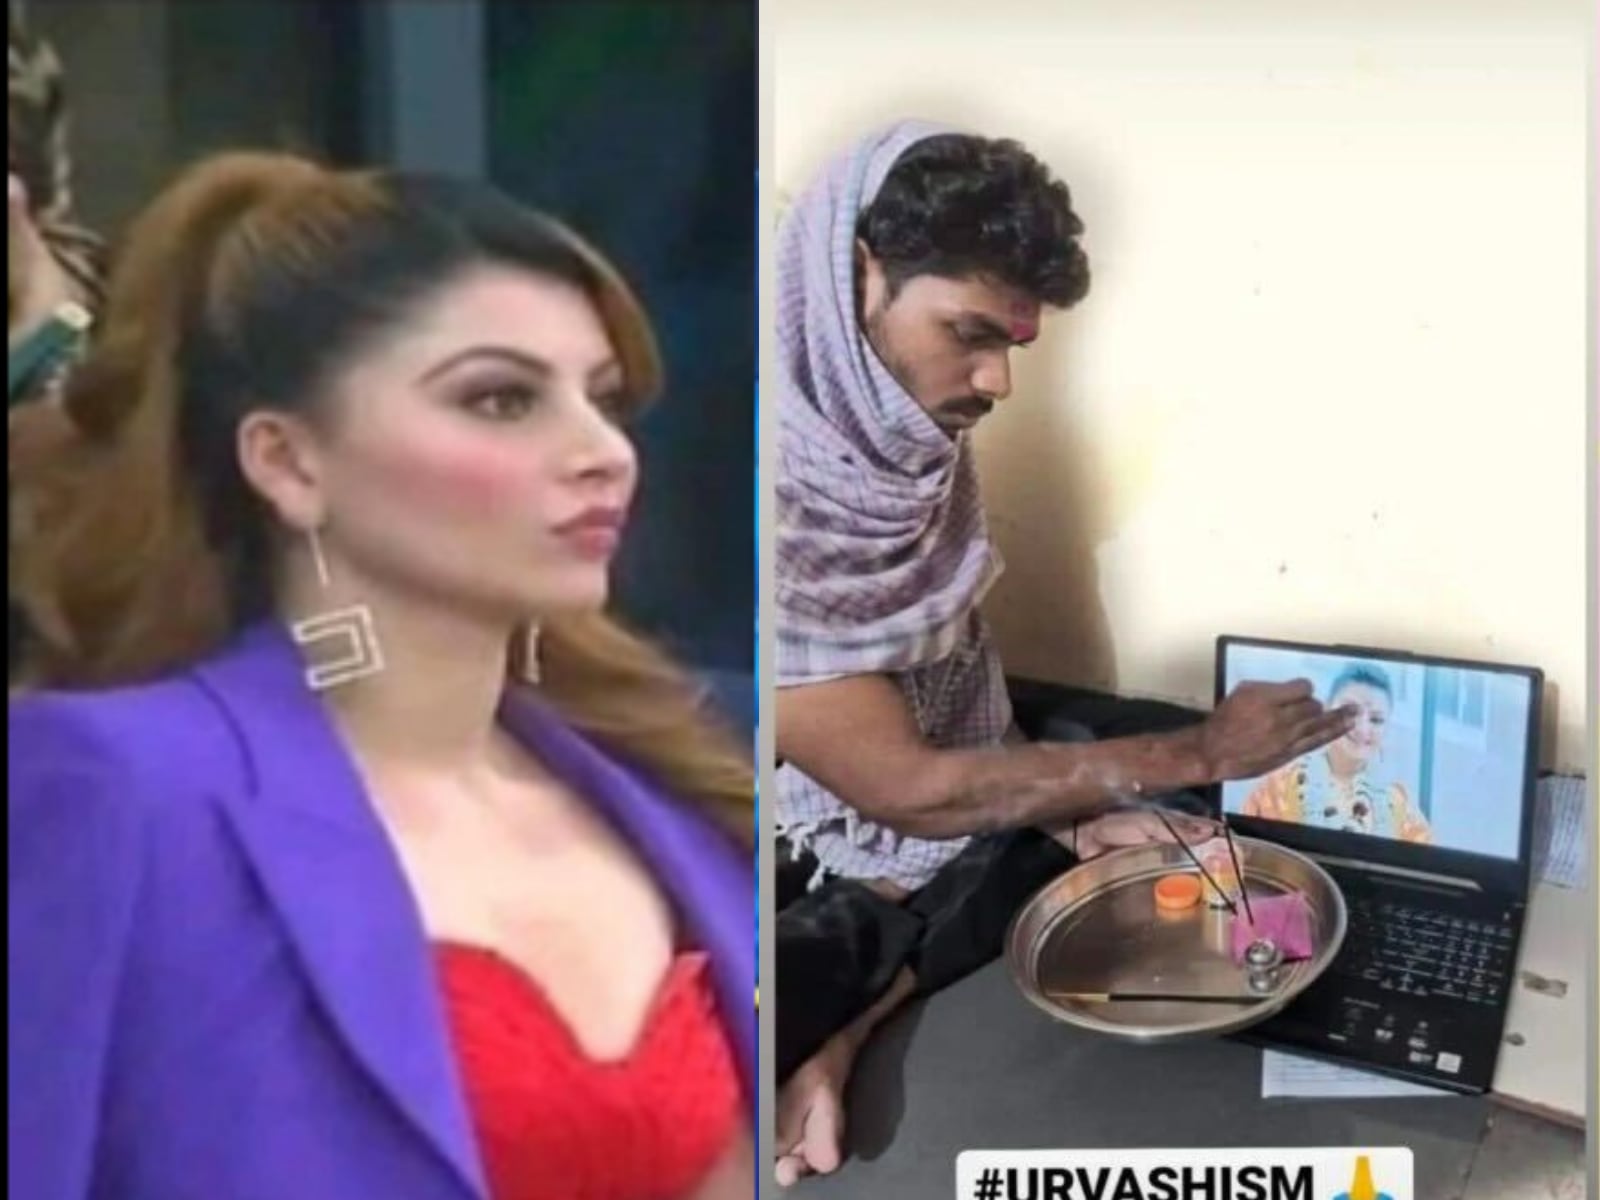 Urvashi Rautela Shares 'Fan' Photo Praying to Her After India's Win. Is She  Trolling All of Us? - News18